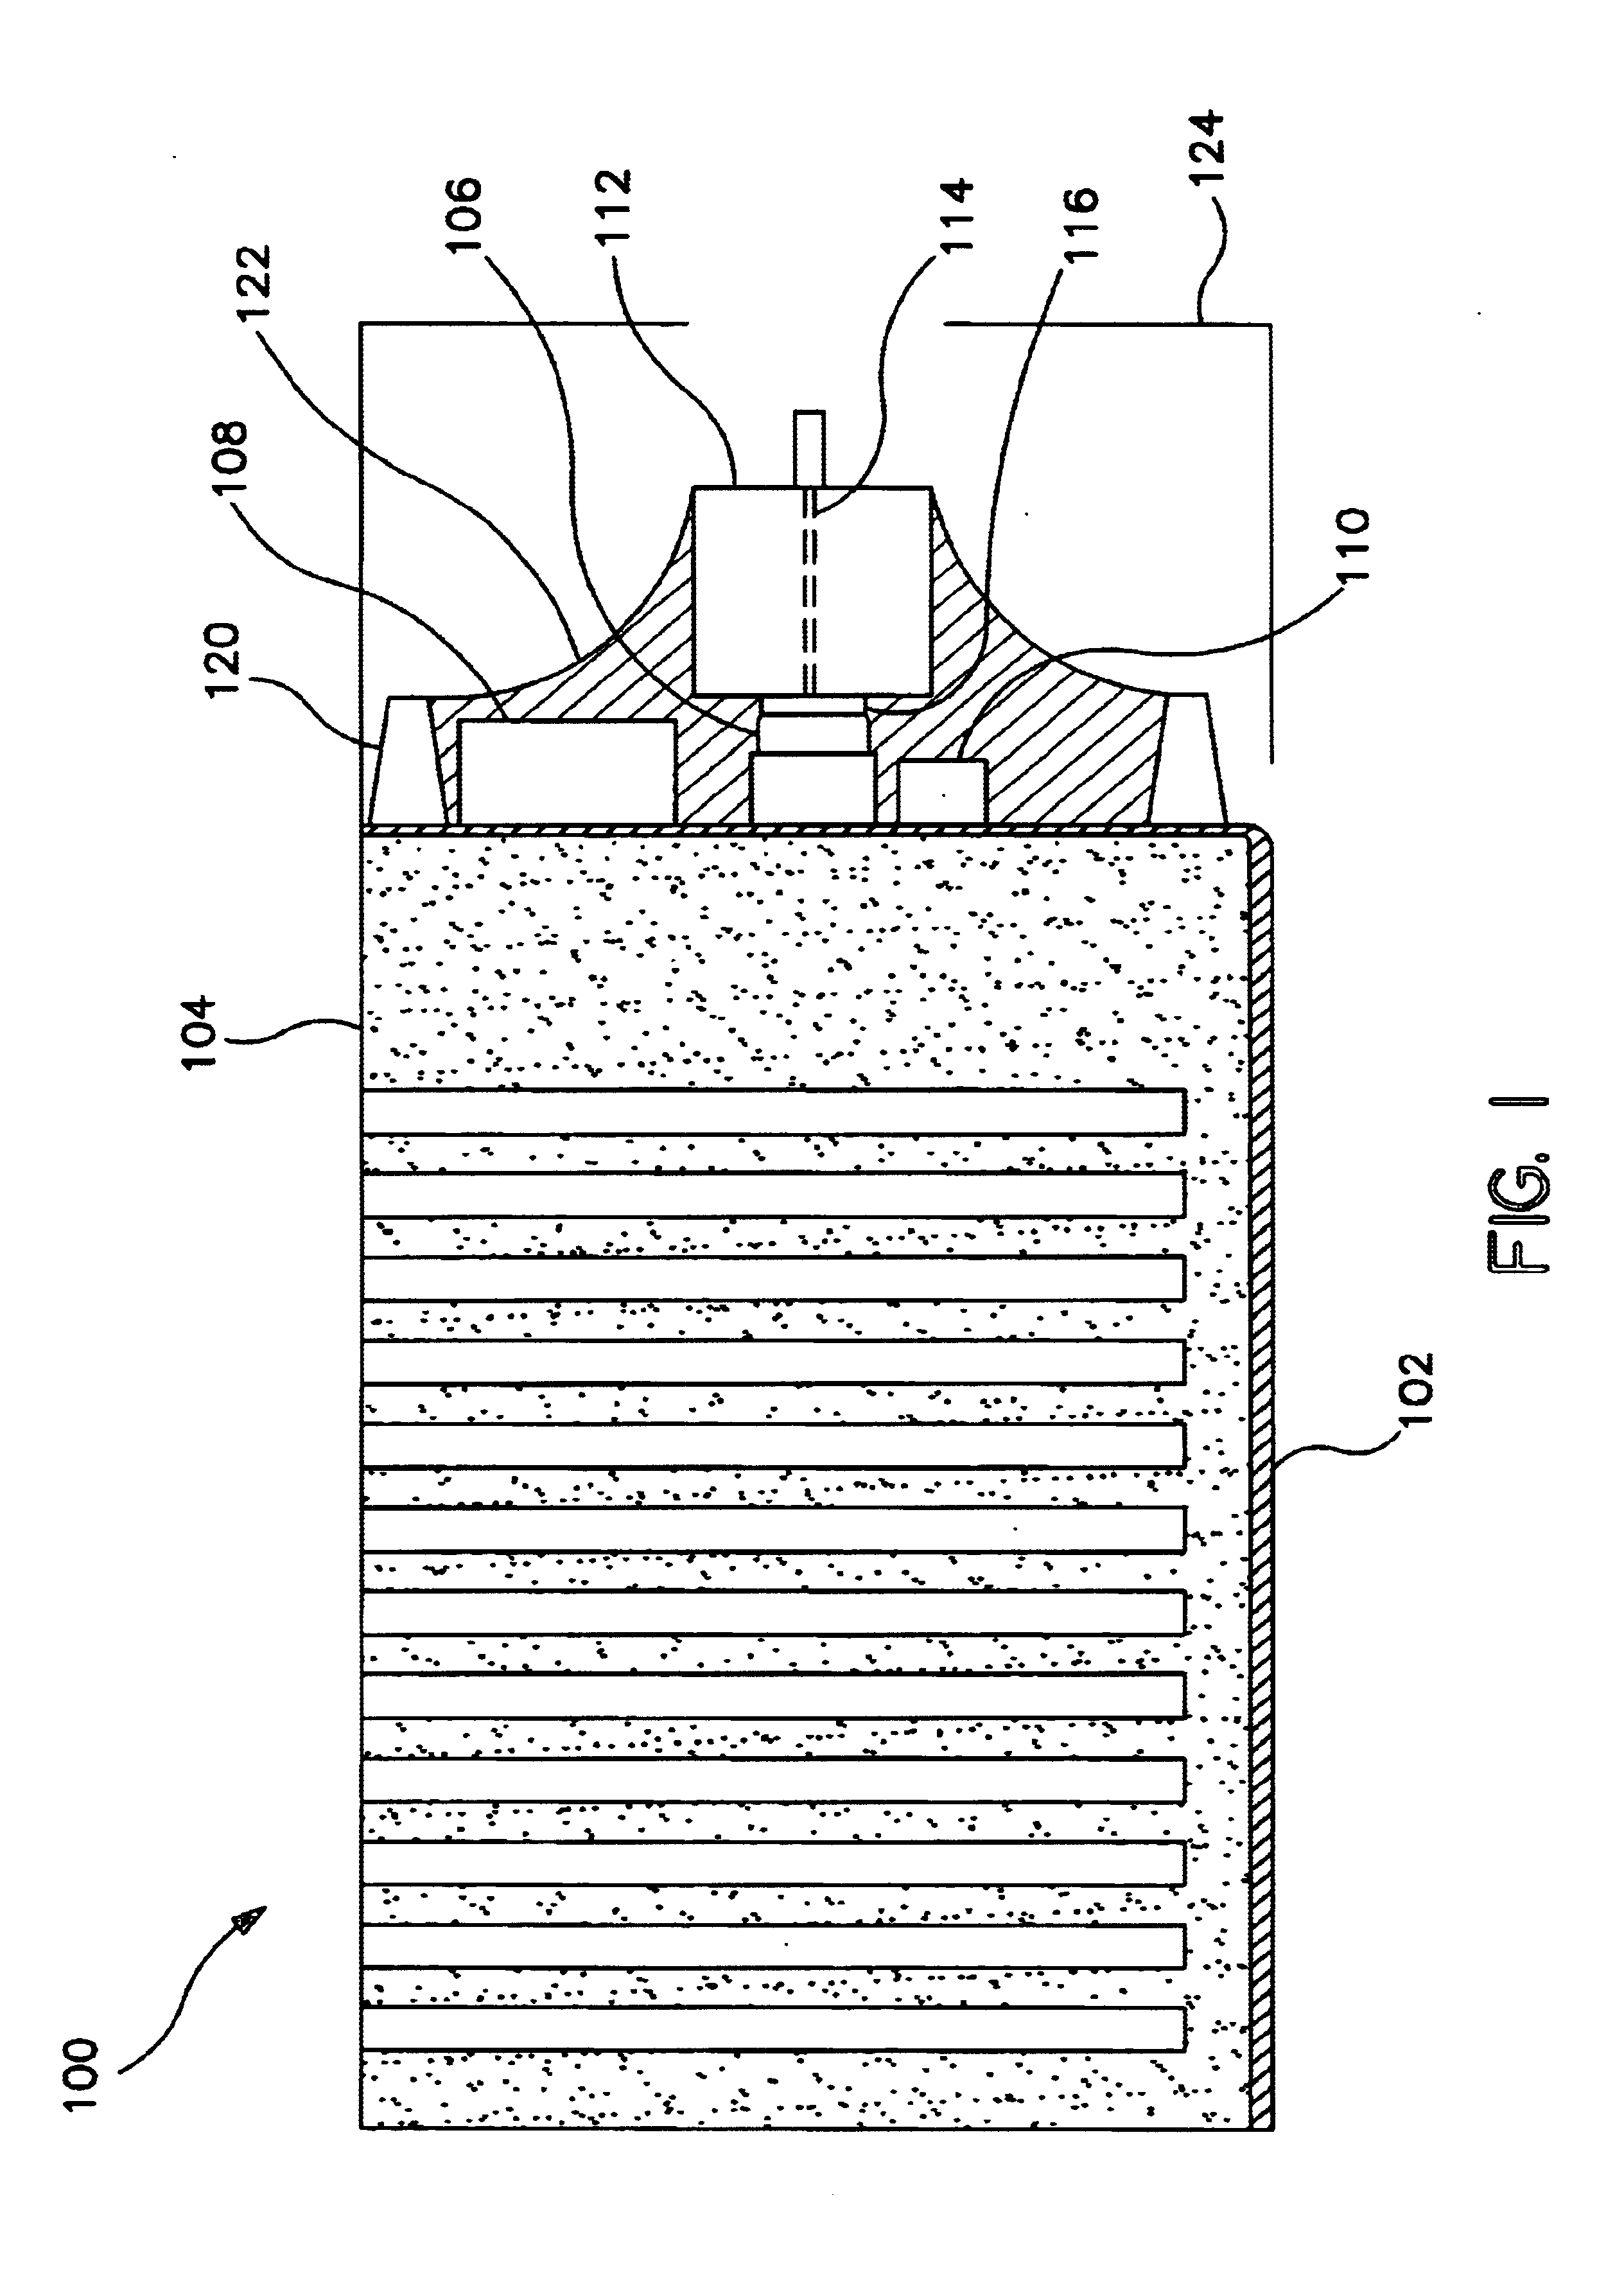 Method and apparatus for coupling optical elements to optoelectronic devices for manufacturing optical transceiver modules